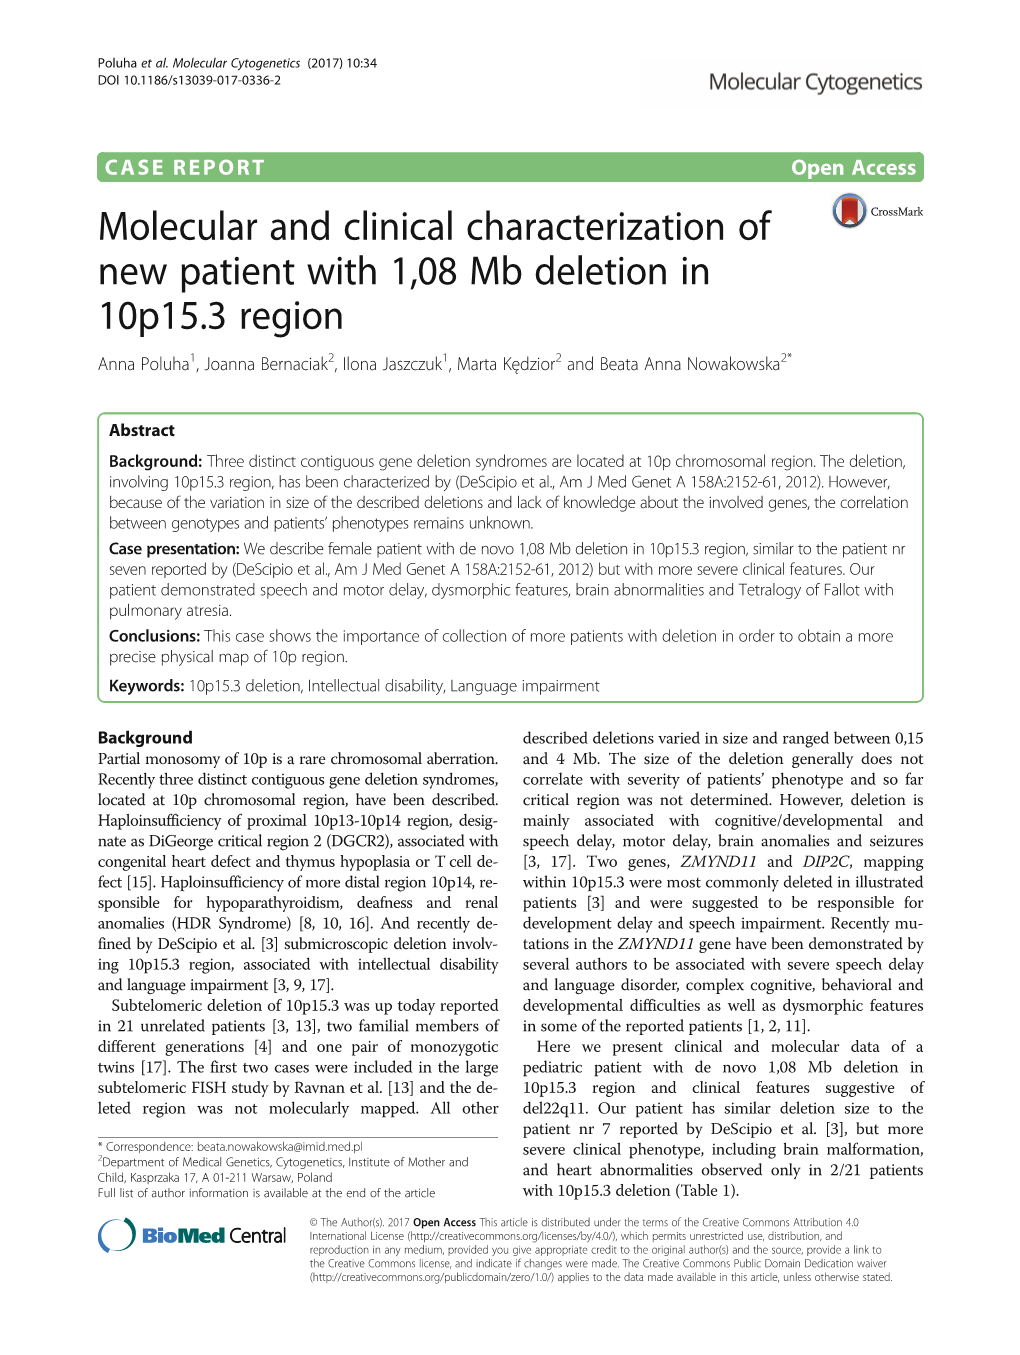 Molecular and Clinical Characterization of New Patient with 1,08 Mb